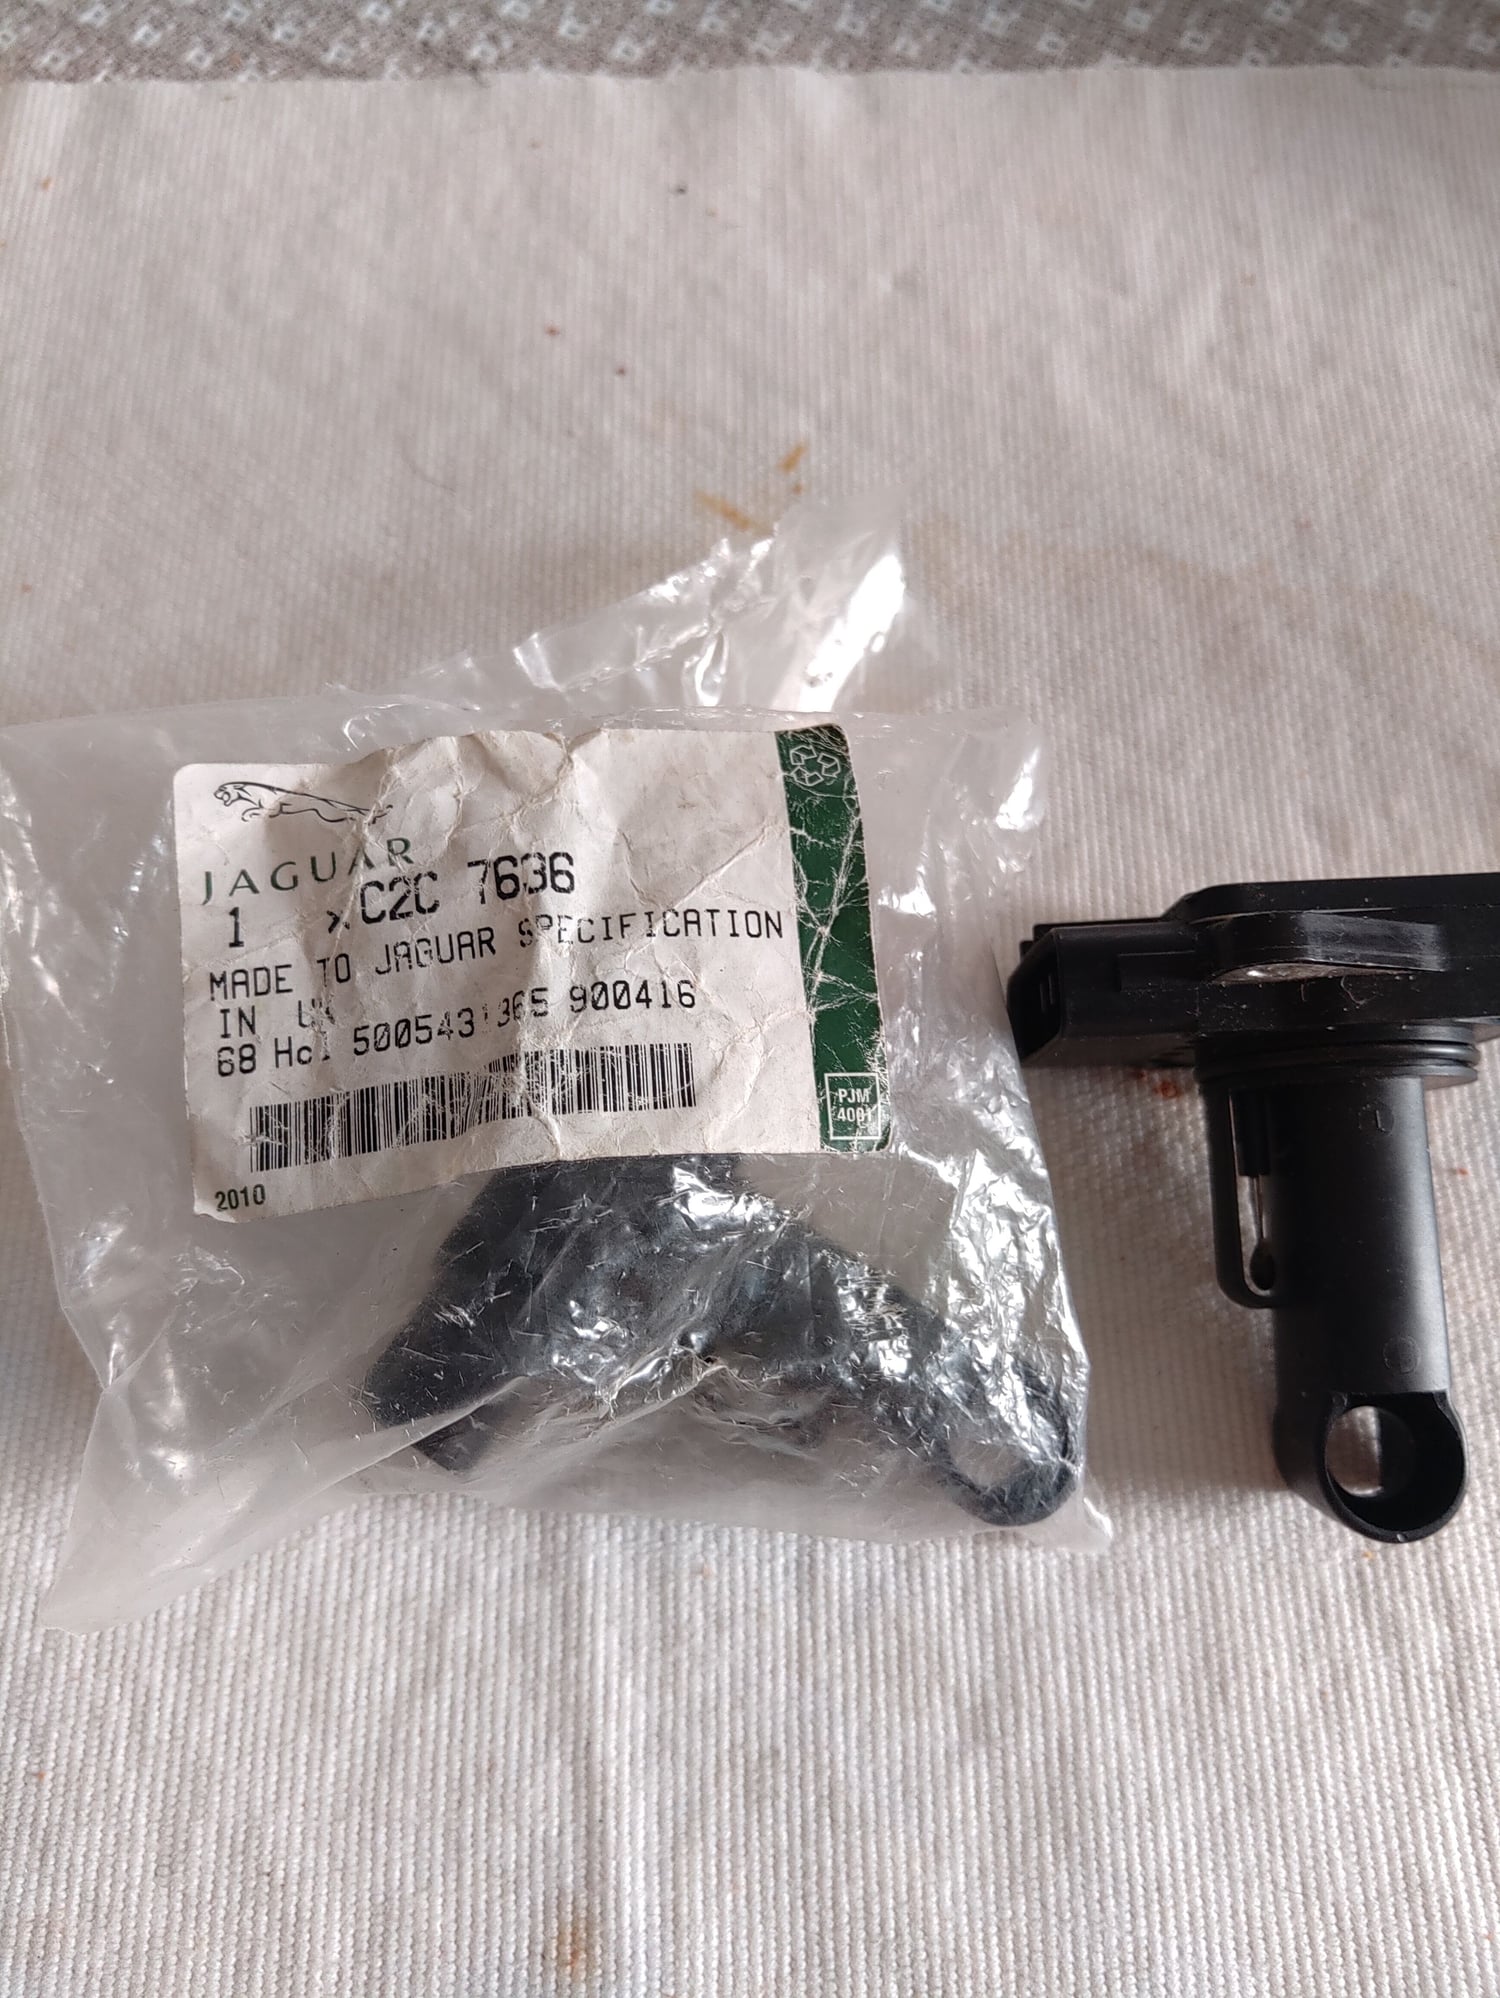 Miscellaneous - 2003 XKR Parts Lot, - New - 2002 to 2006 Jaguar XKR - Onset, MA 02558, United States